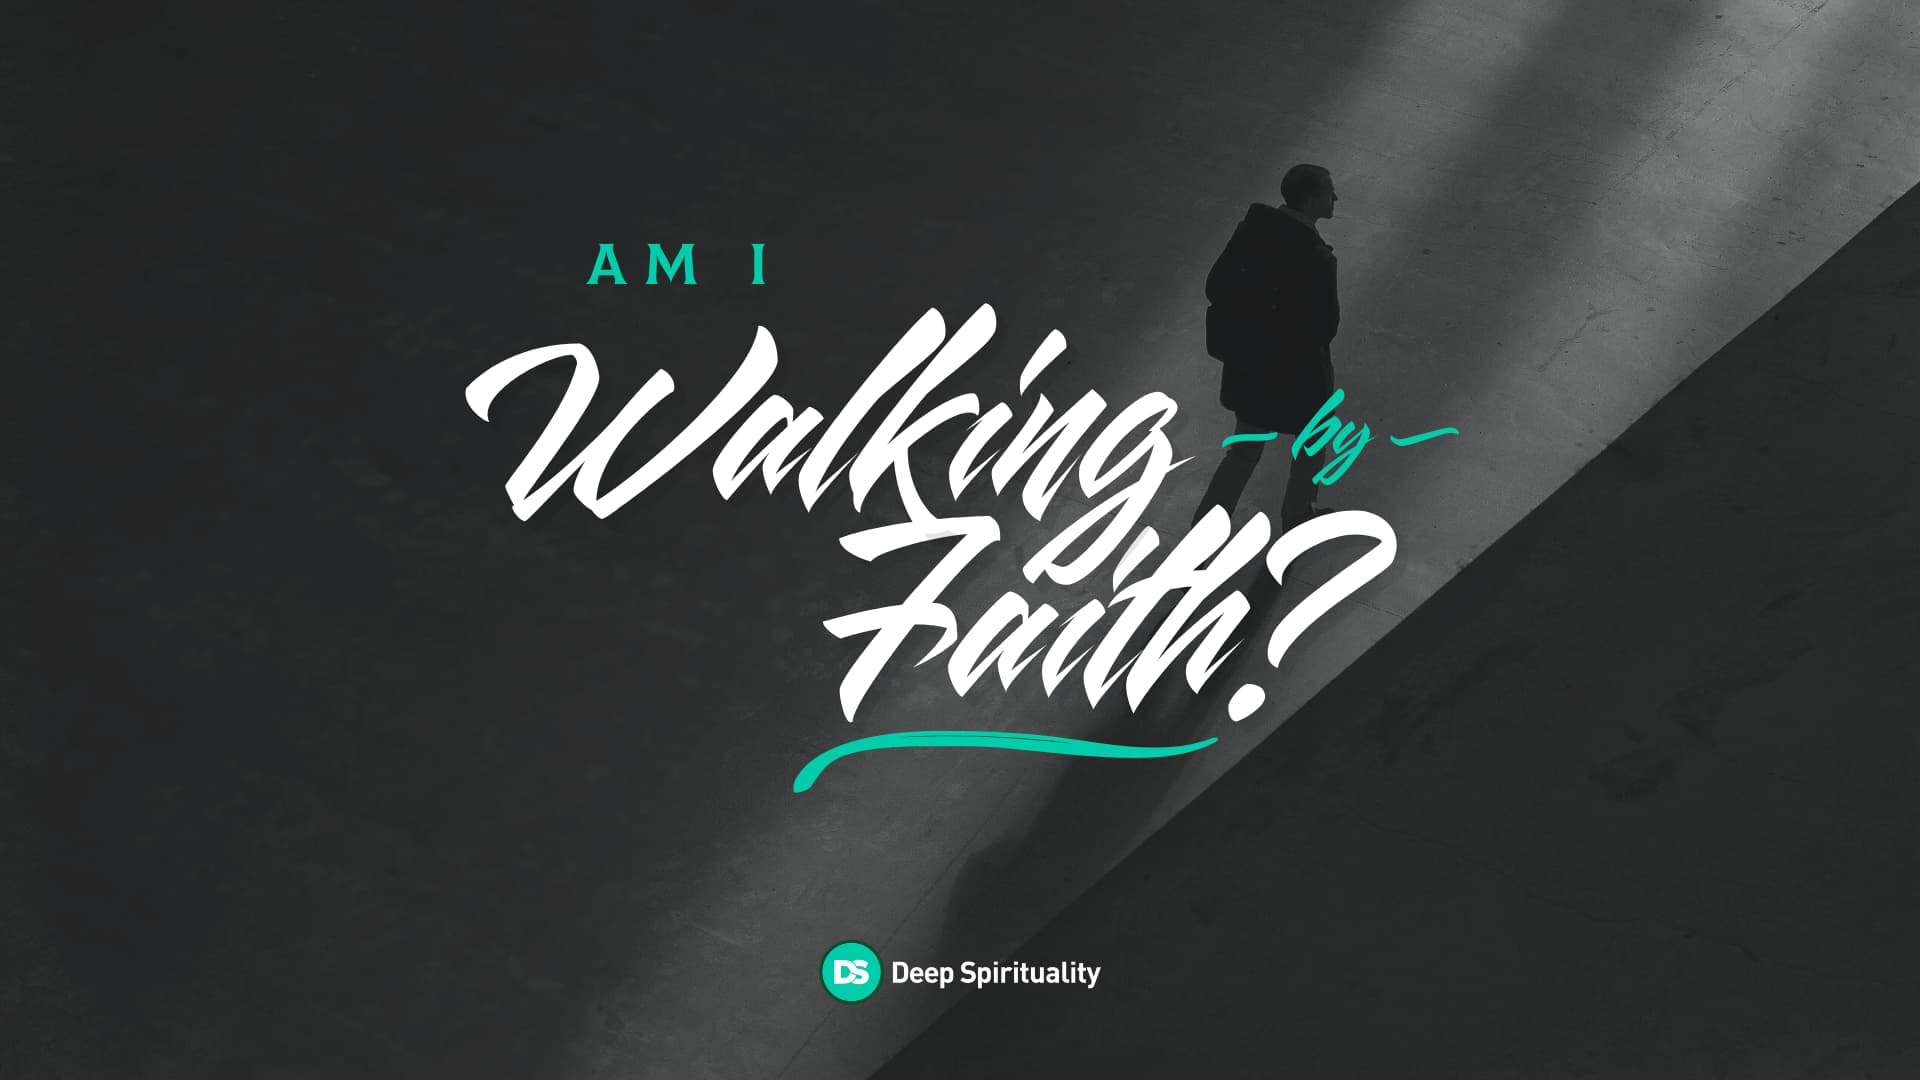 How Do I Know if I’m Walking by Faith? 14